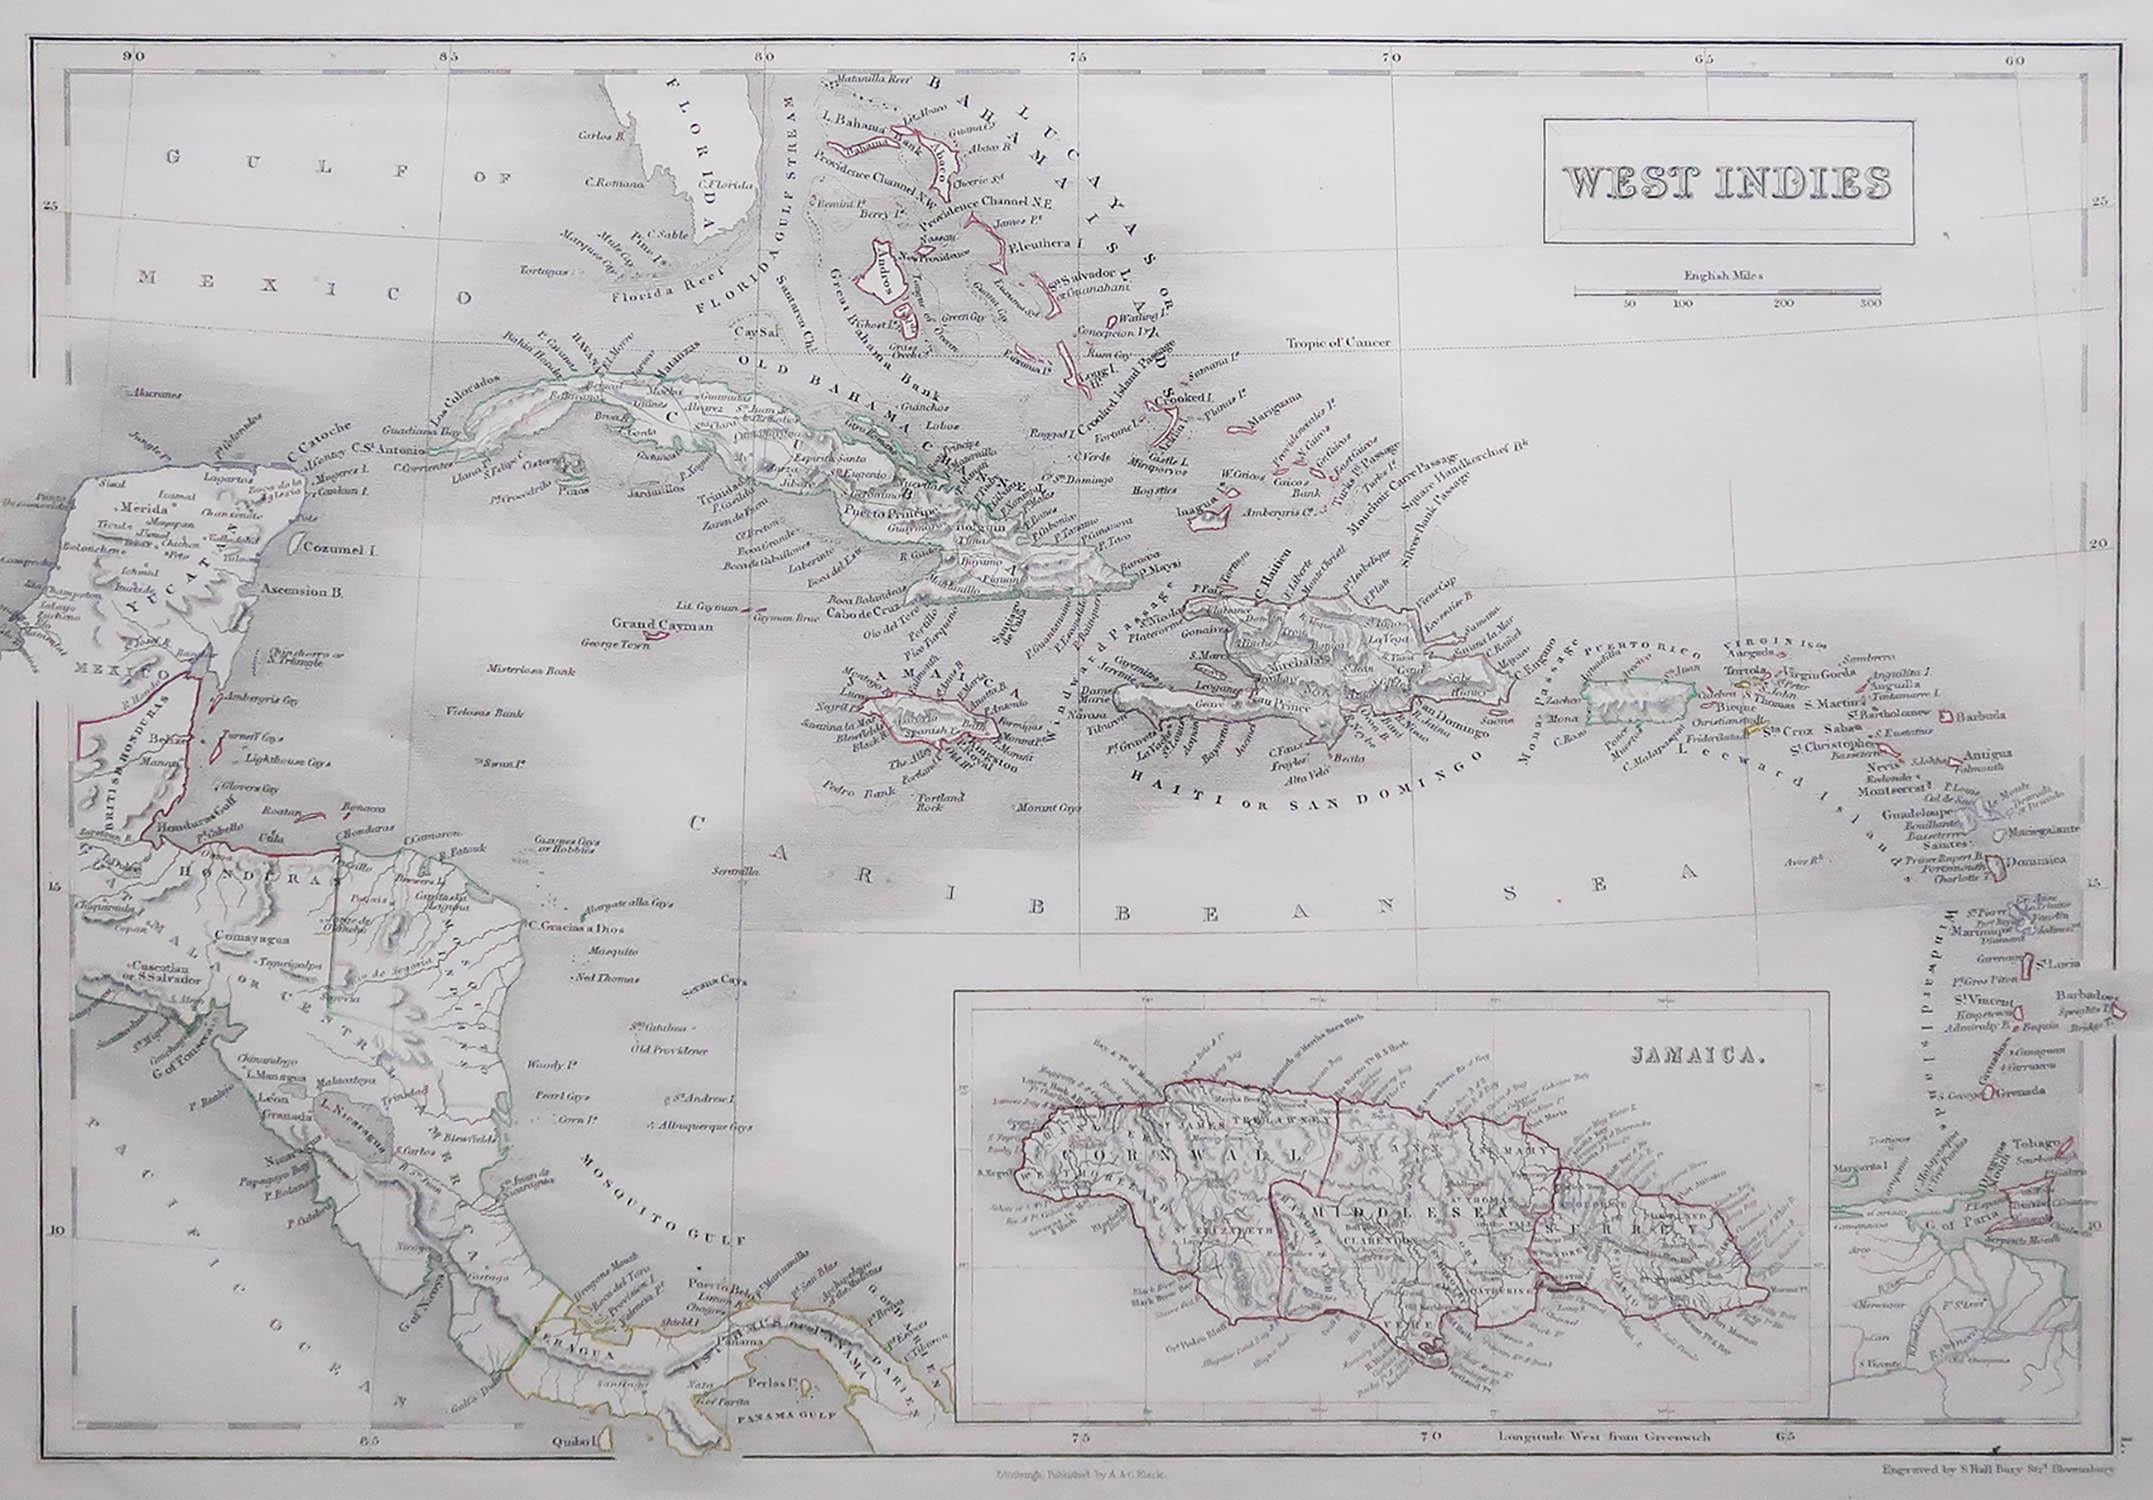 Great map of The West Indies

Drawn and engraved by Sidney Hall

Steel engraving 

Original colour outline

Published by A & C Black. 1847

Unframed

Free shipping.

 